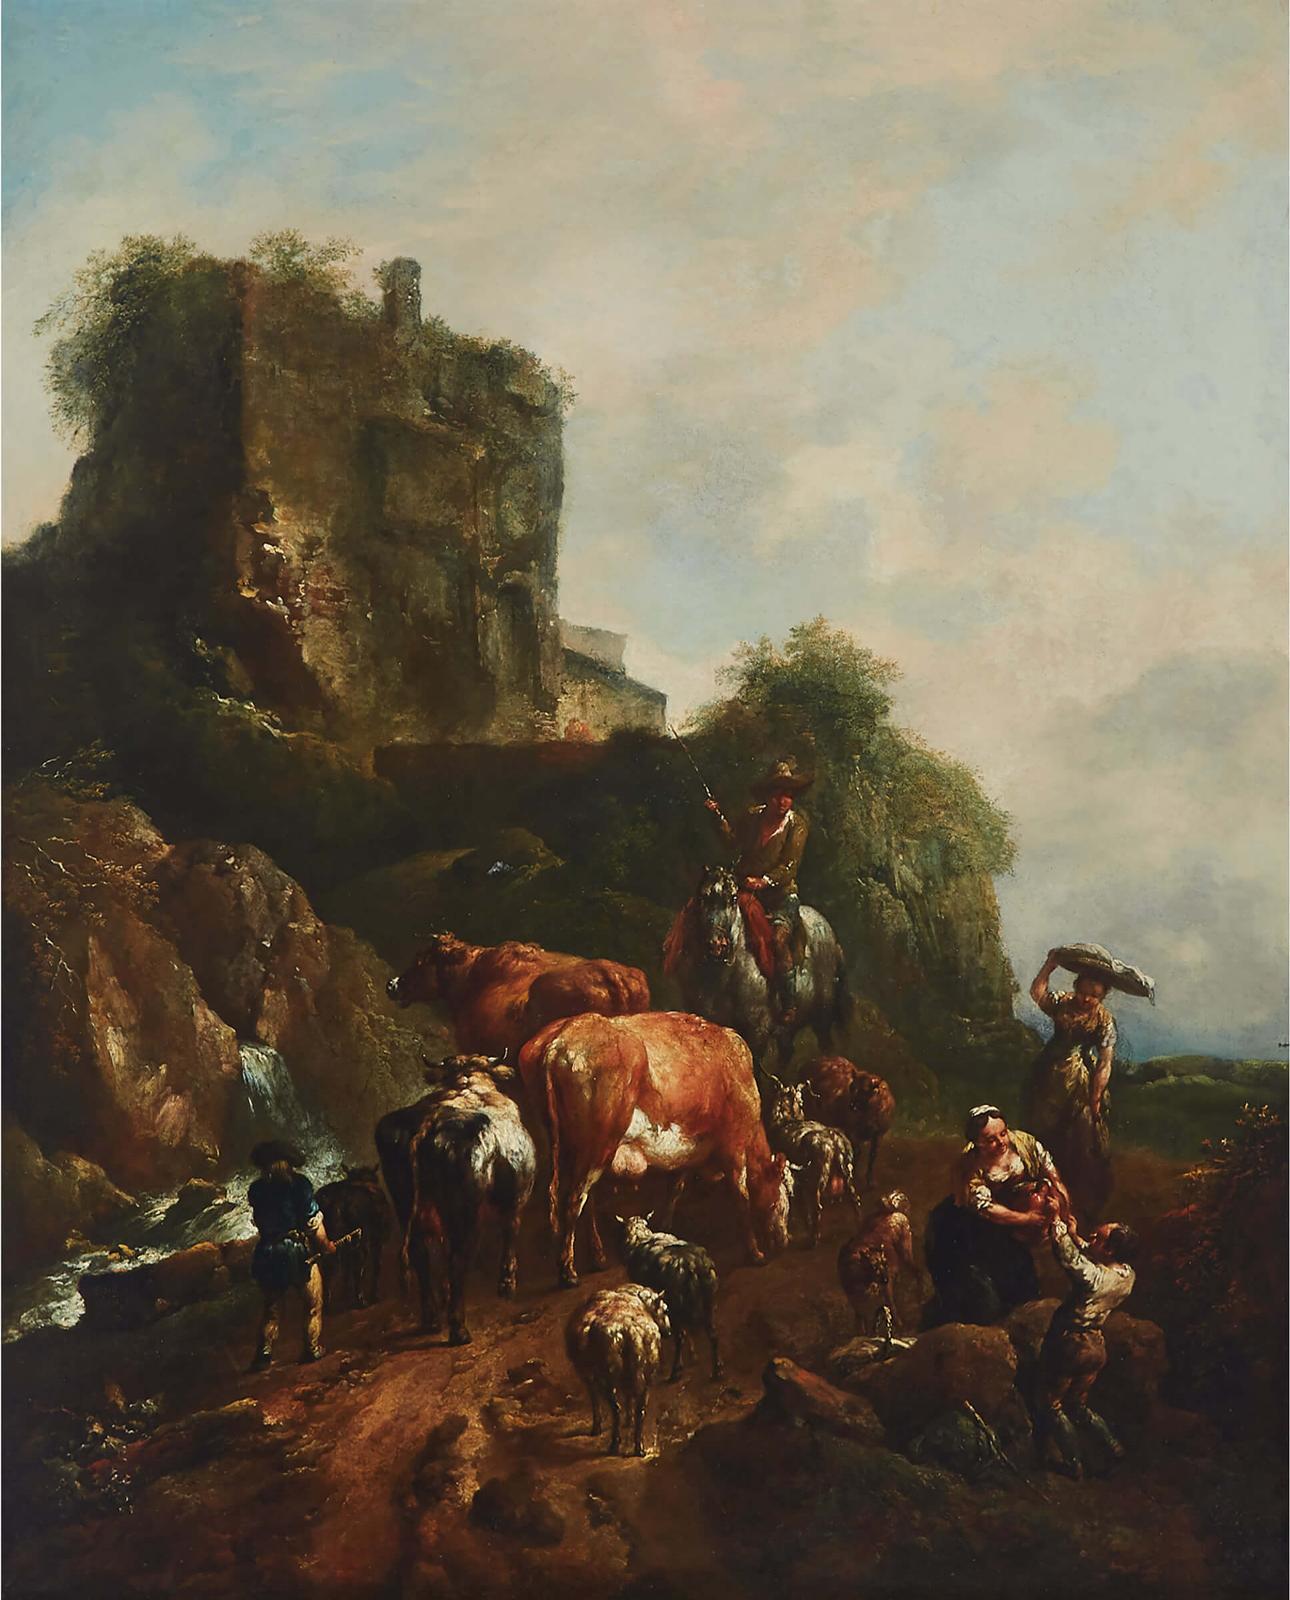 Johann Christian Brand (1722-1795) - A Gathering Of Herdsmen With Cattle, Sheep, Dogs And Washerwoman